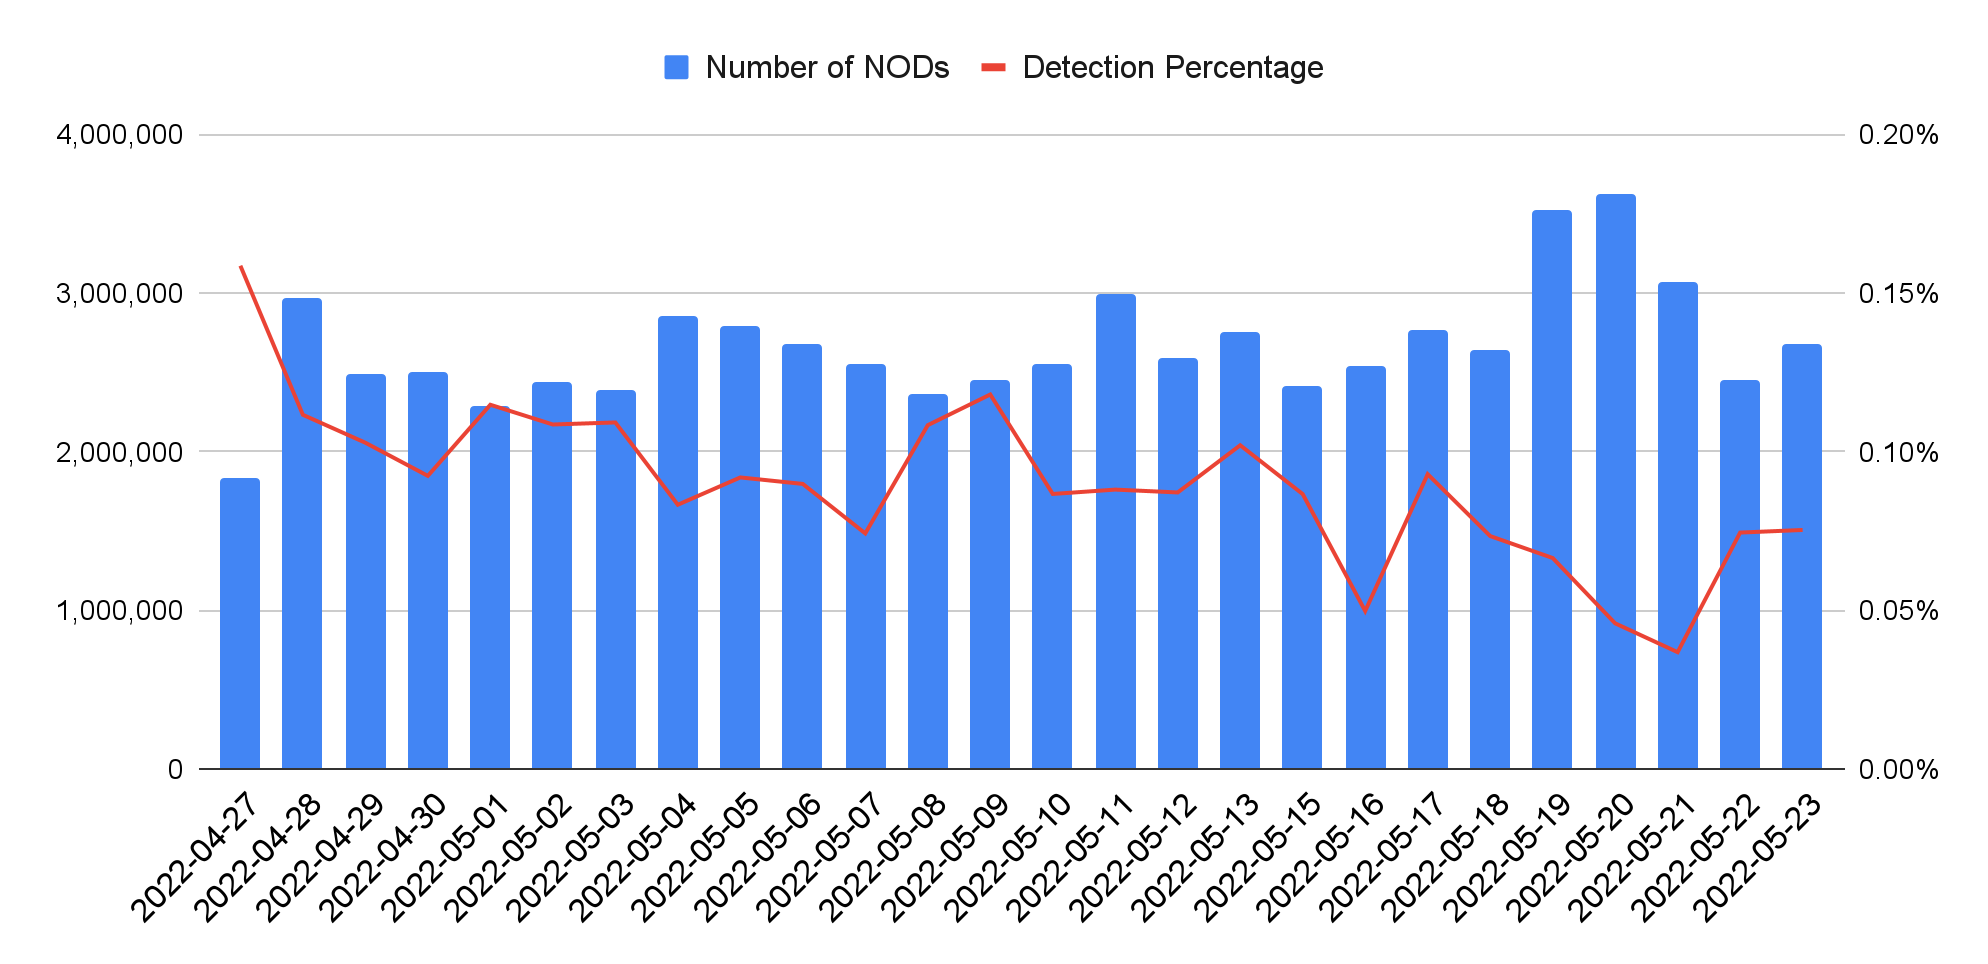 Number of newly observed domains shown in blue bars. Detection percentage shown in red line. Period covered is April 27, 2022-May 23, 2022